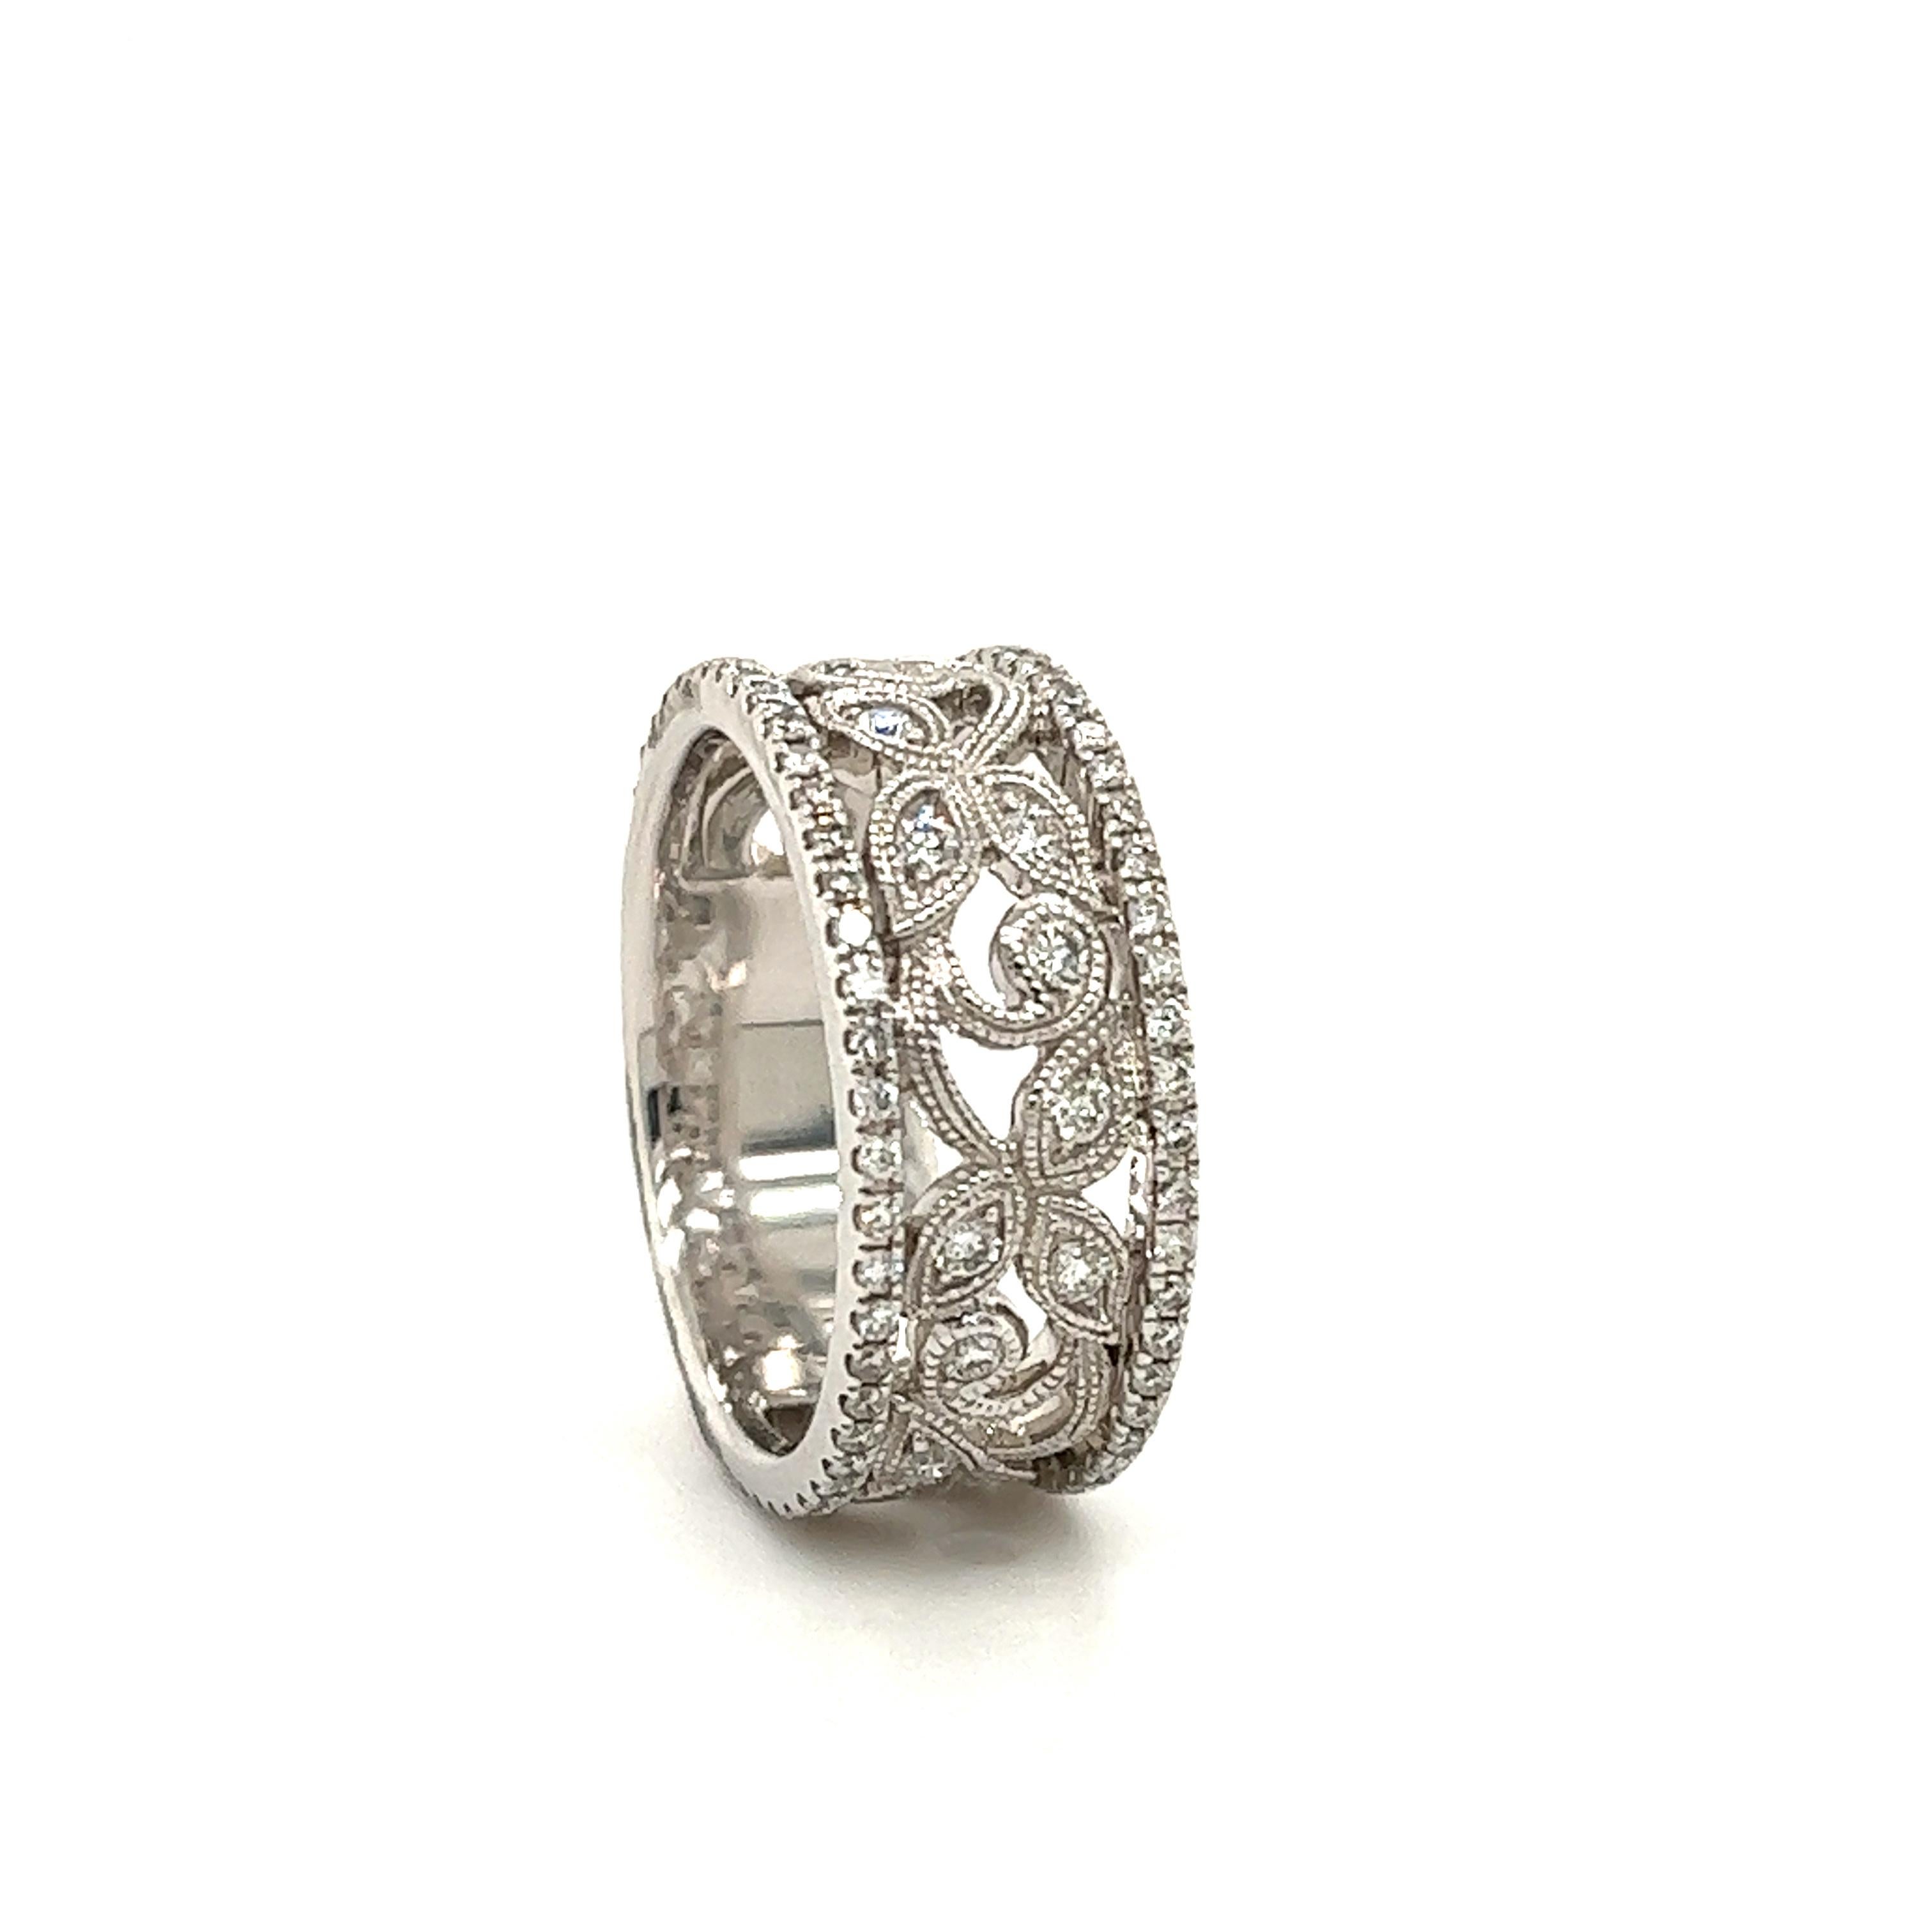 Beautiful ring crafted in 14k white gold. The ring is crafted by famed designer Neil Lane. The ring is a wide band design as it measures 8.6 mm in width. Neil Lane is known for his bridal designs and fine crafted rings with a delicate vintage feel.